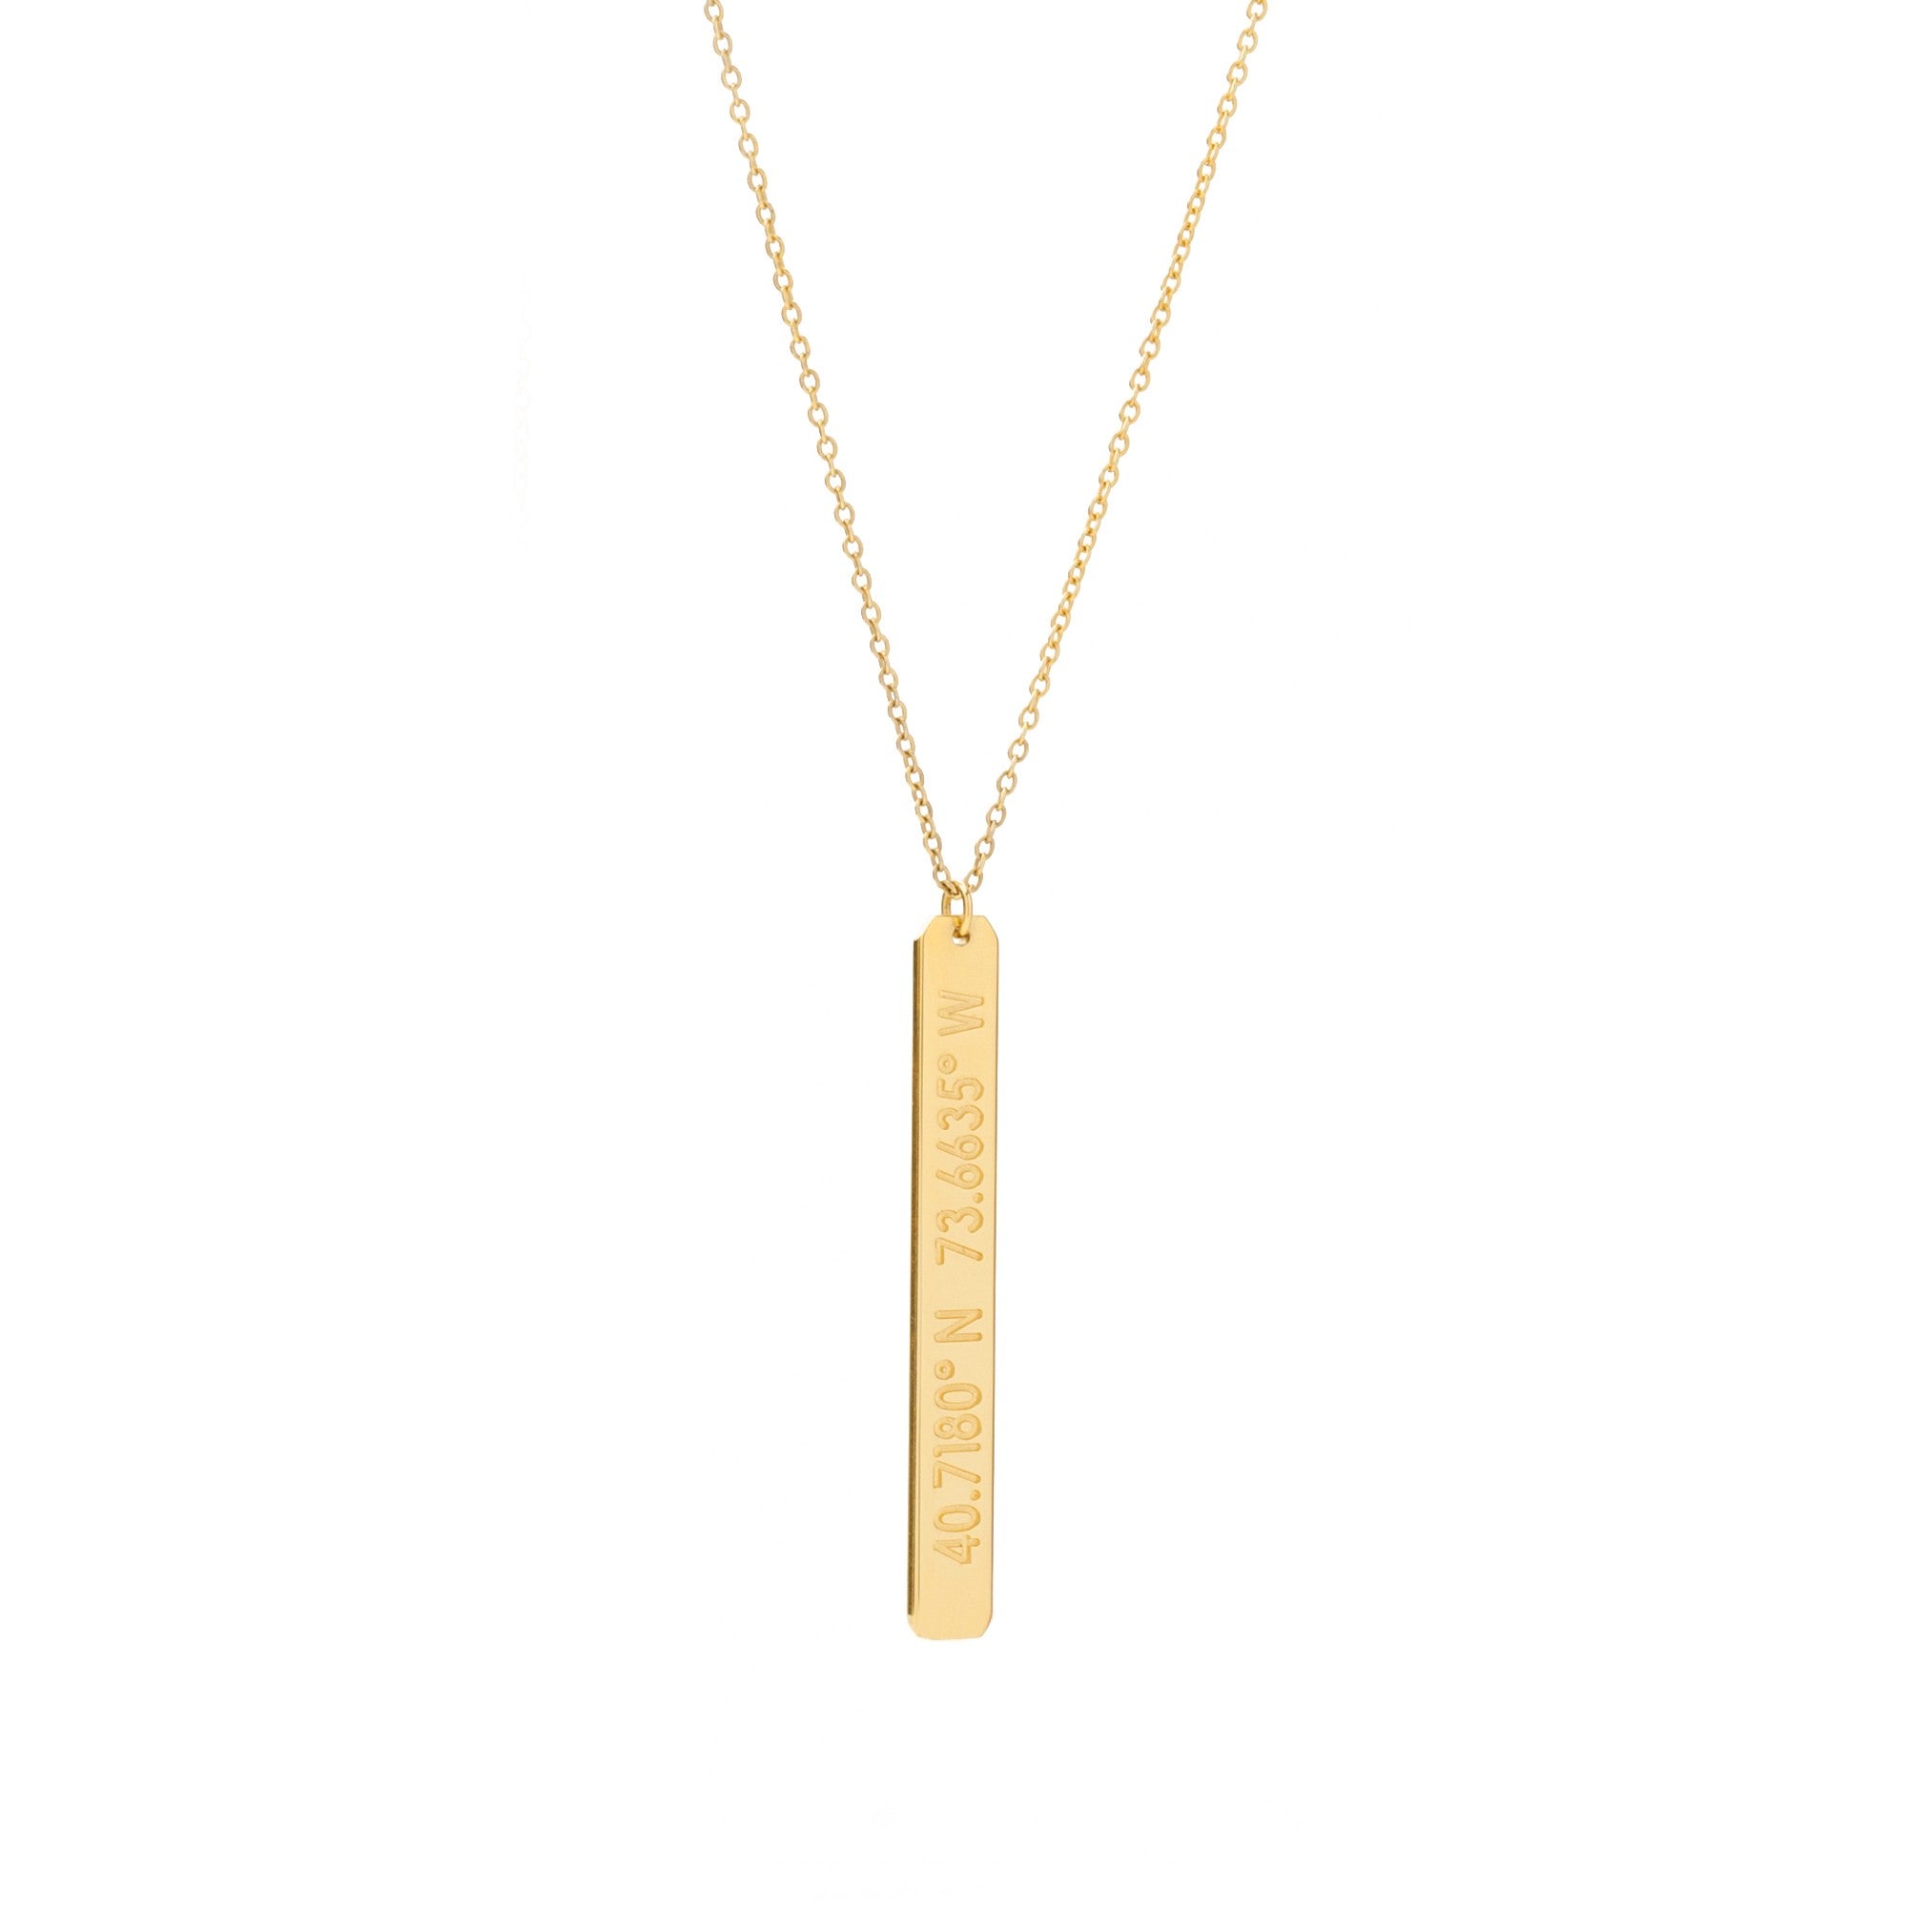 A long gold vertical pendant with inscription on gold chain